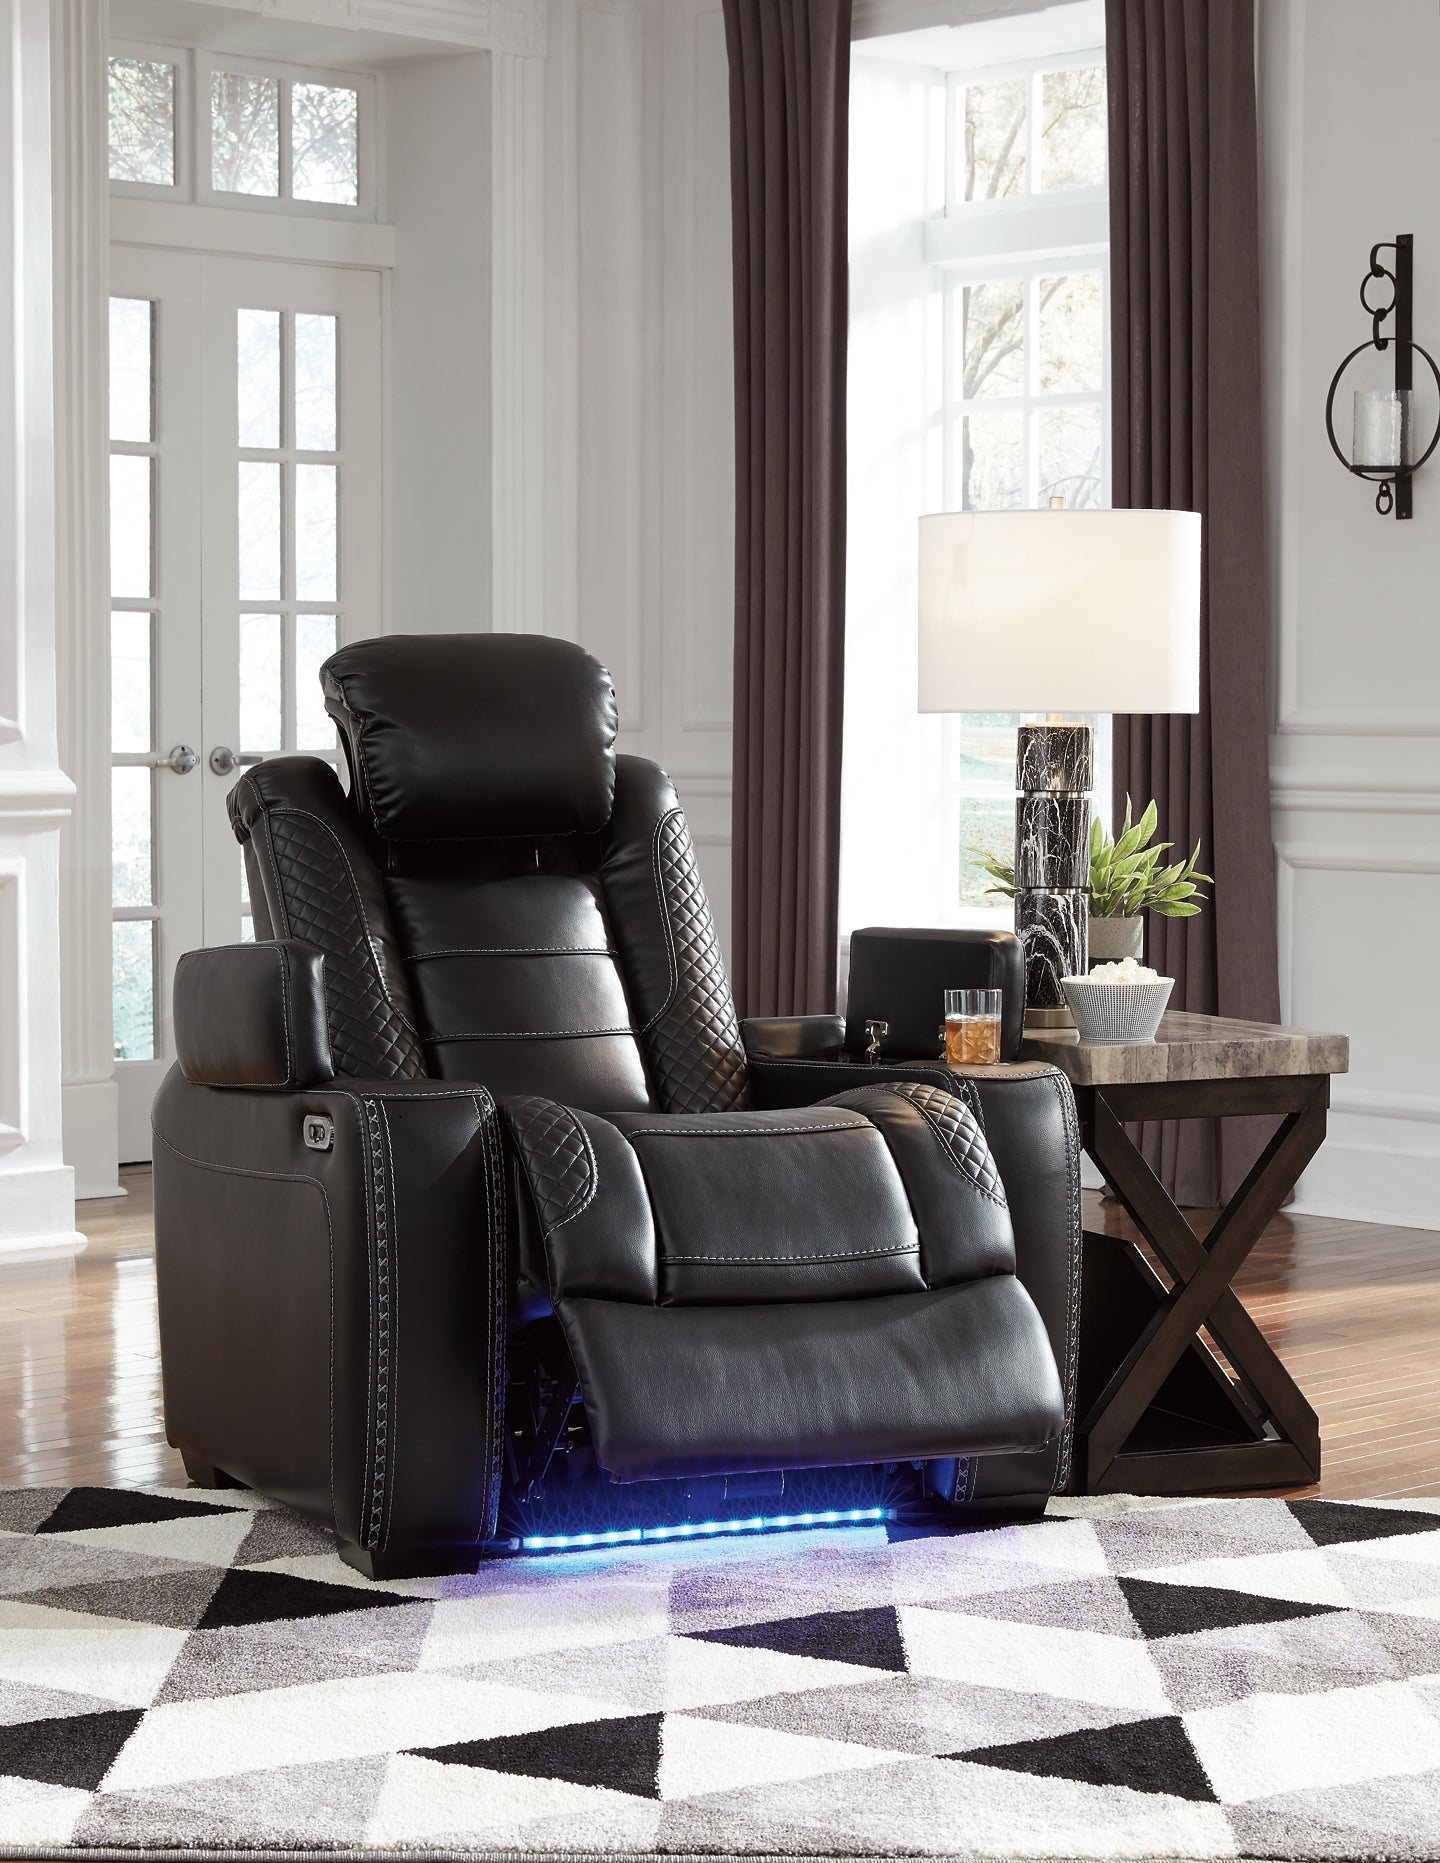 Party Time PWR Recliner/ADJ Headrest at Cloud 9 Mattress & Furniture furniture, home furnishing, home decor